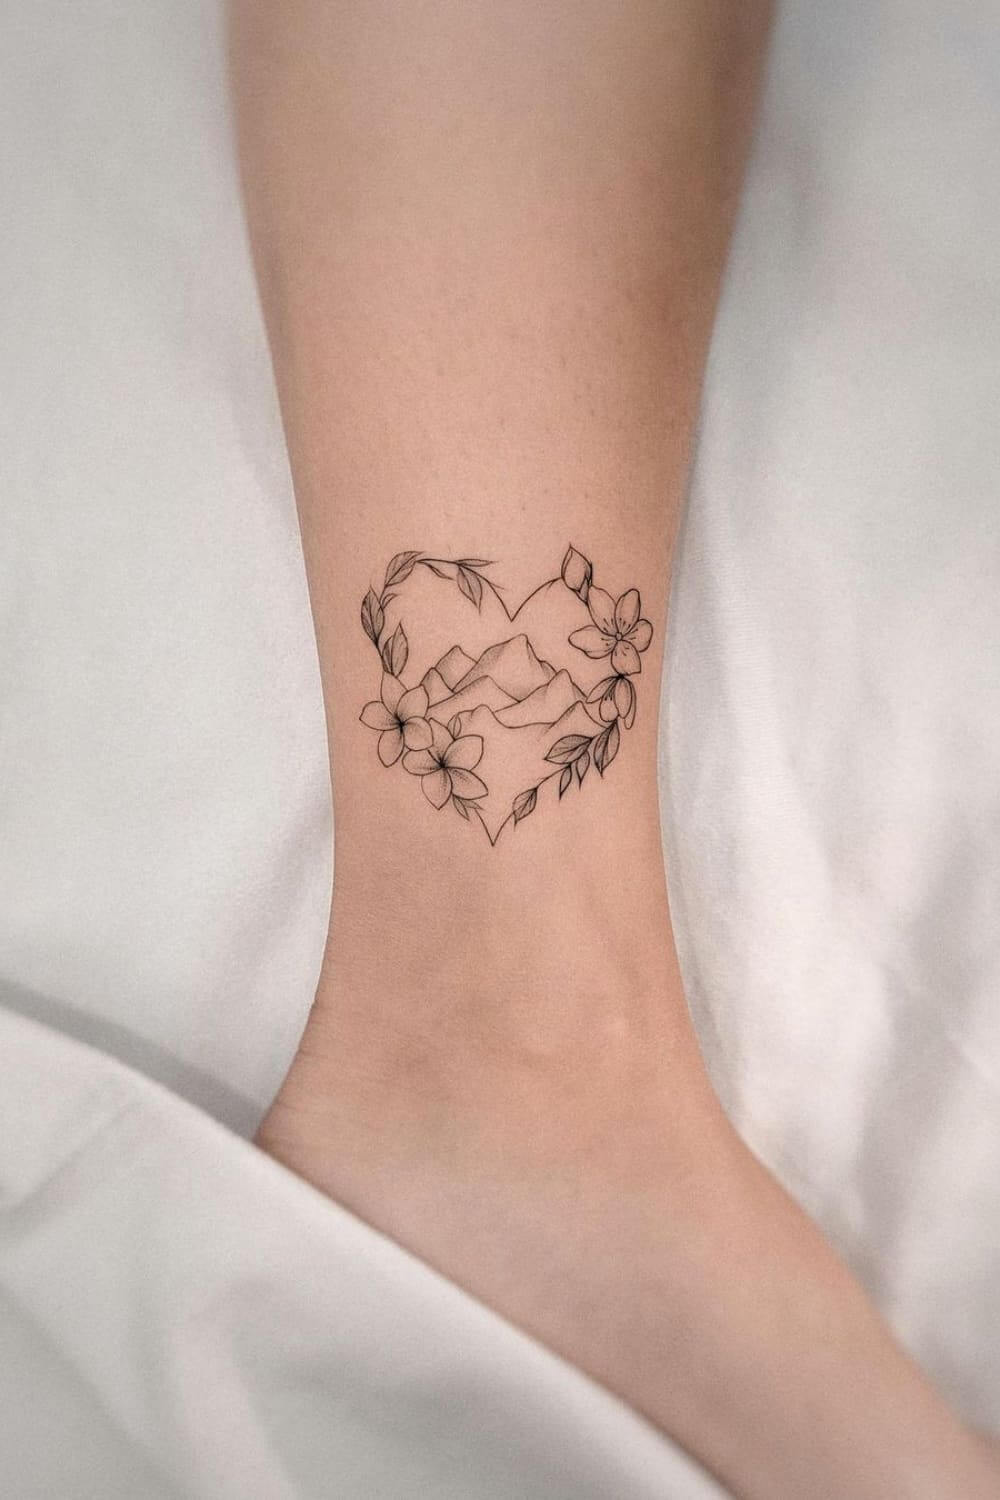 Heart Tattoo Ideas With Flowers